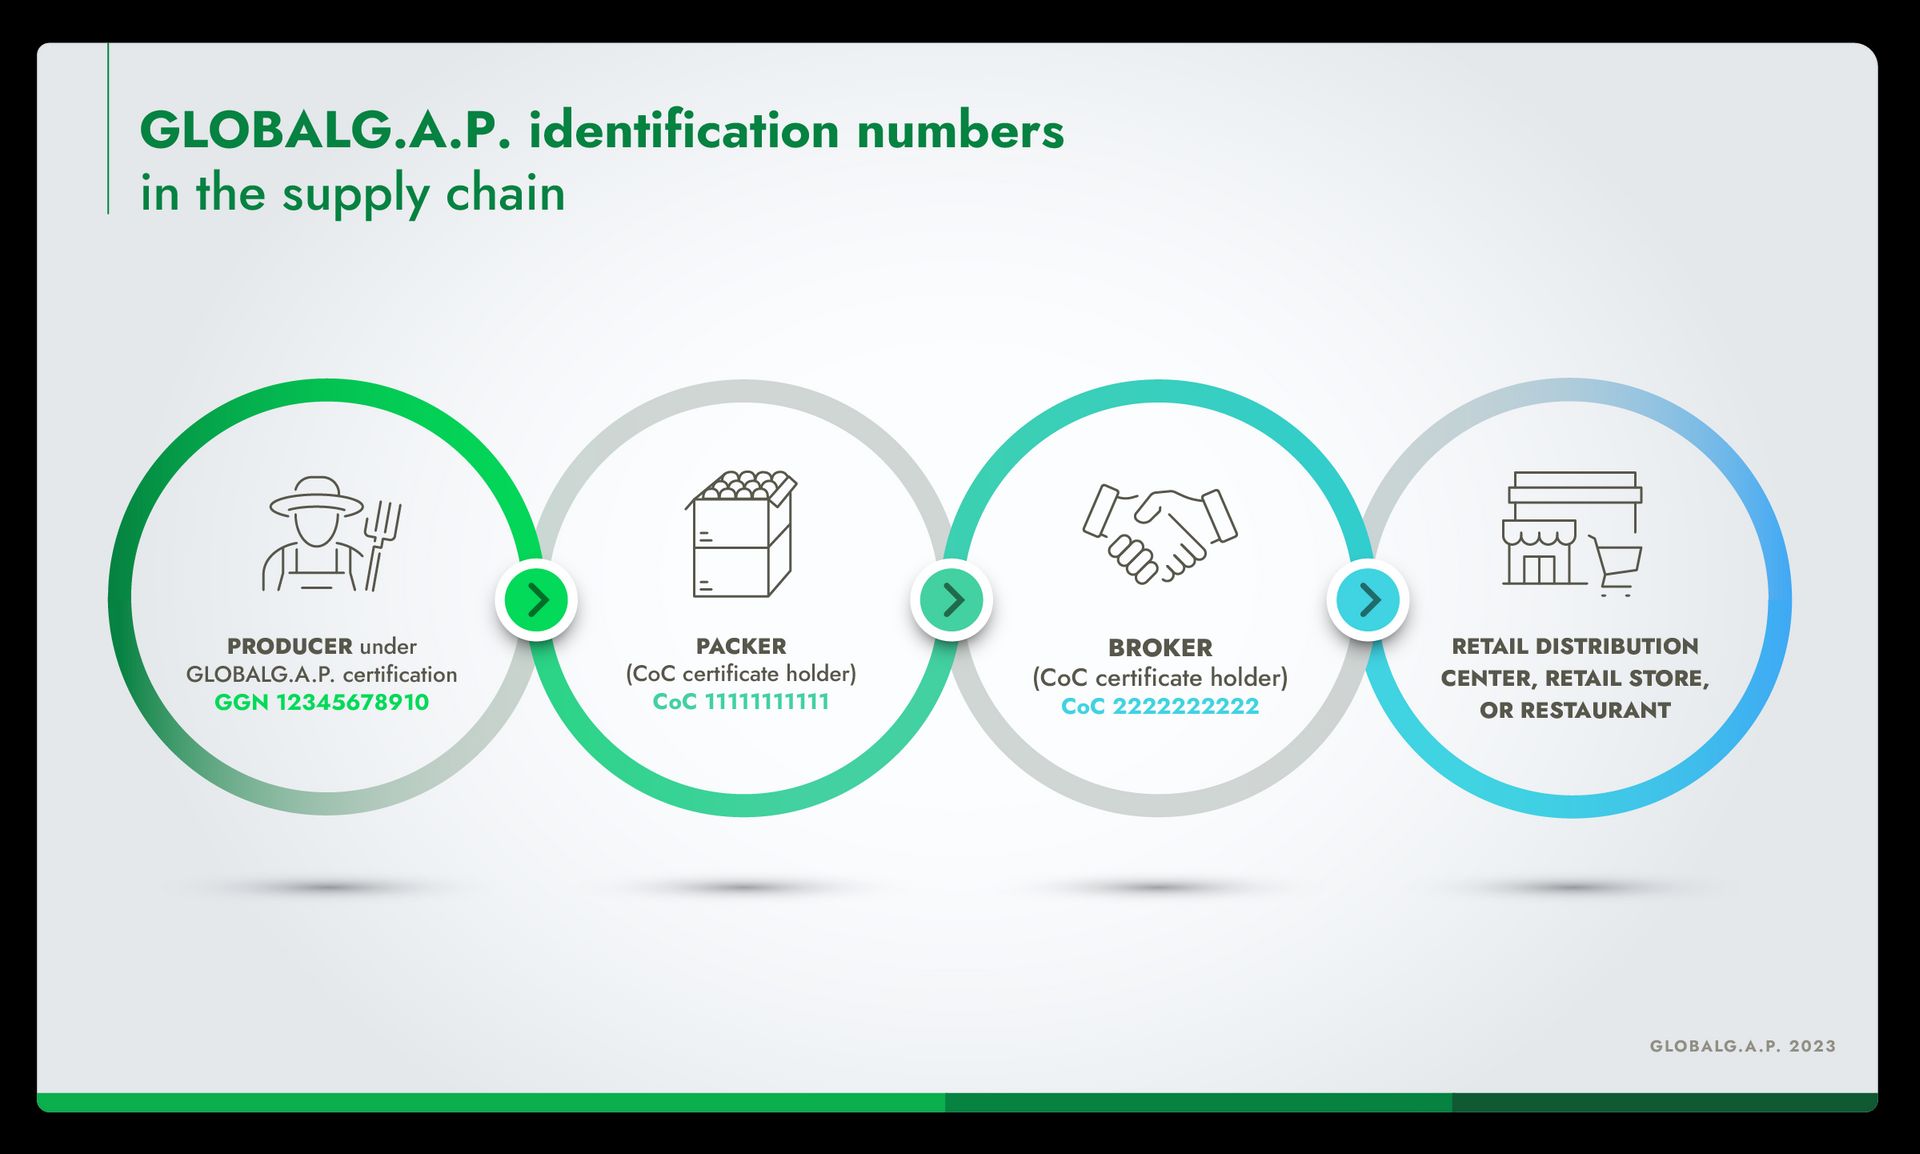 Infographic showing an example of supply chain members and their unique GLOBALG.A.P. identification numbers